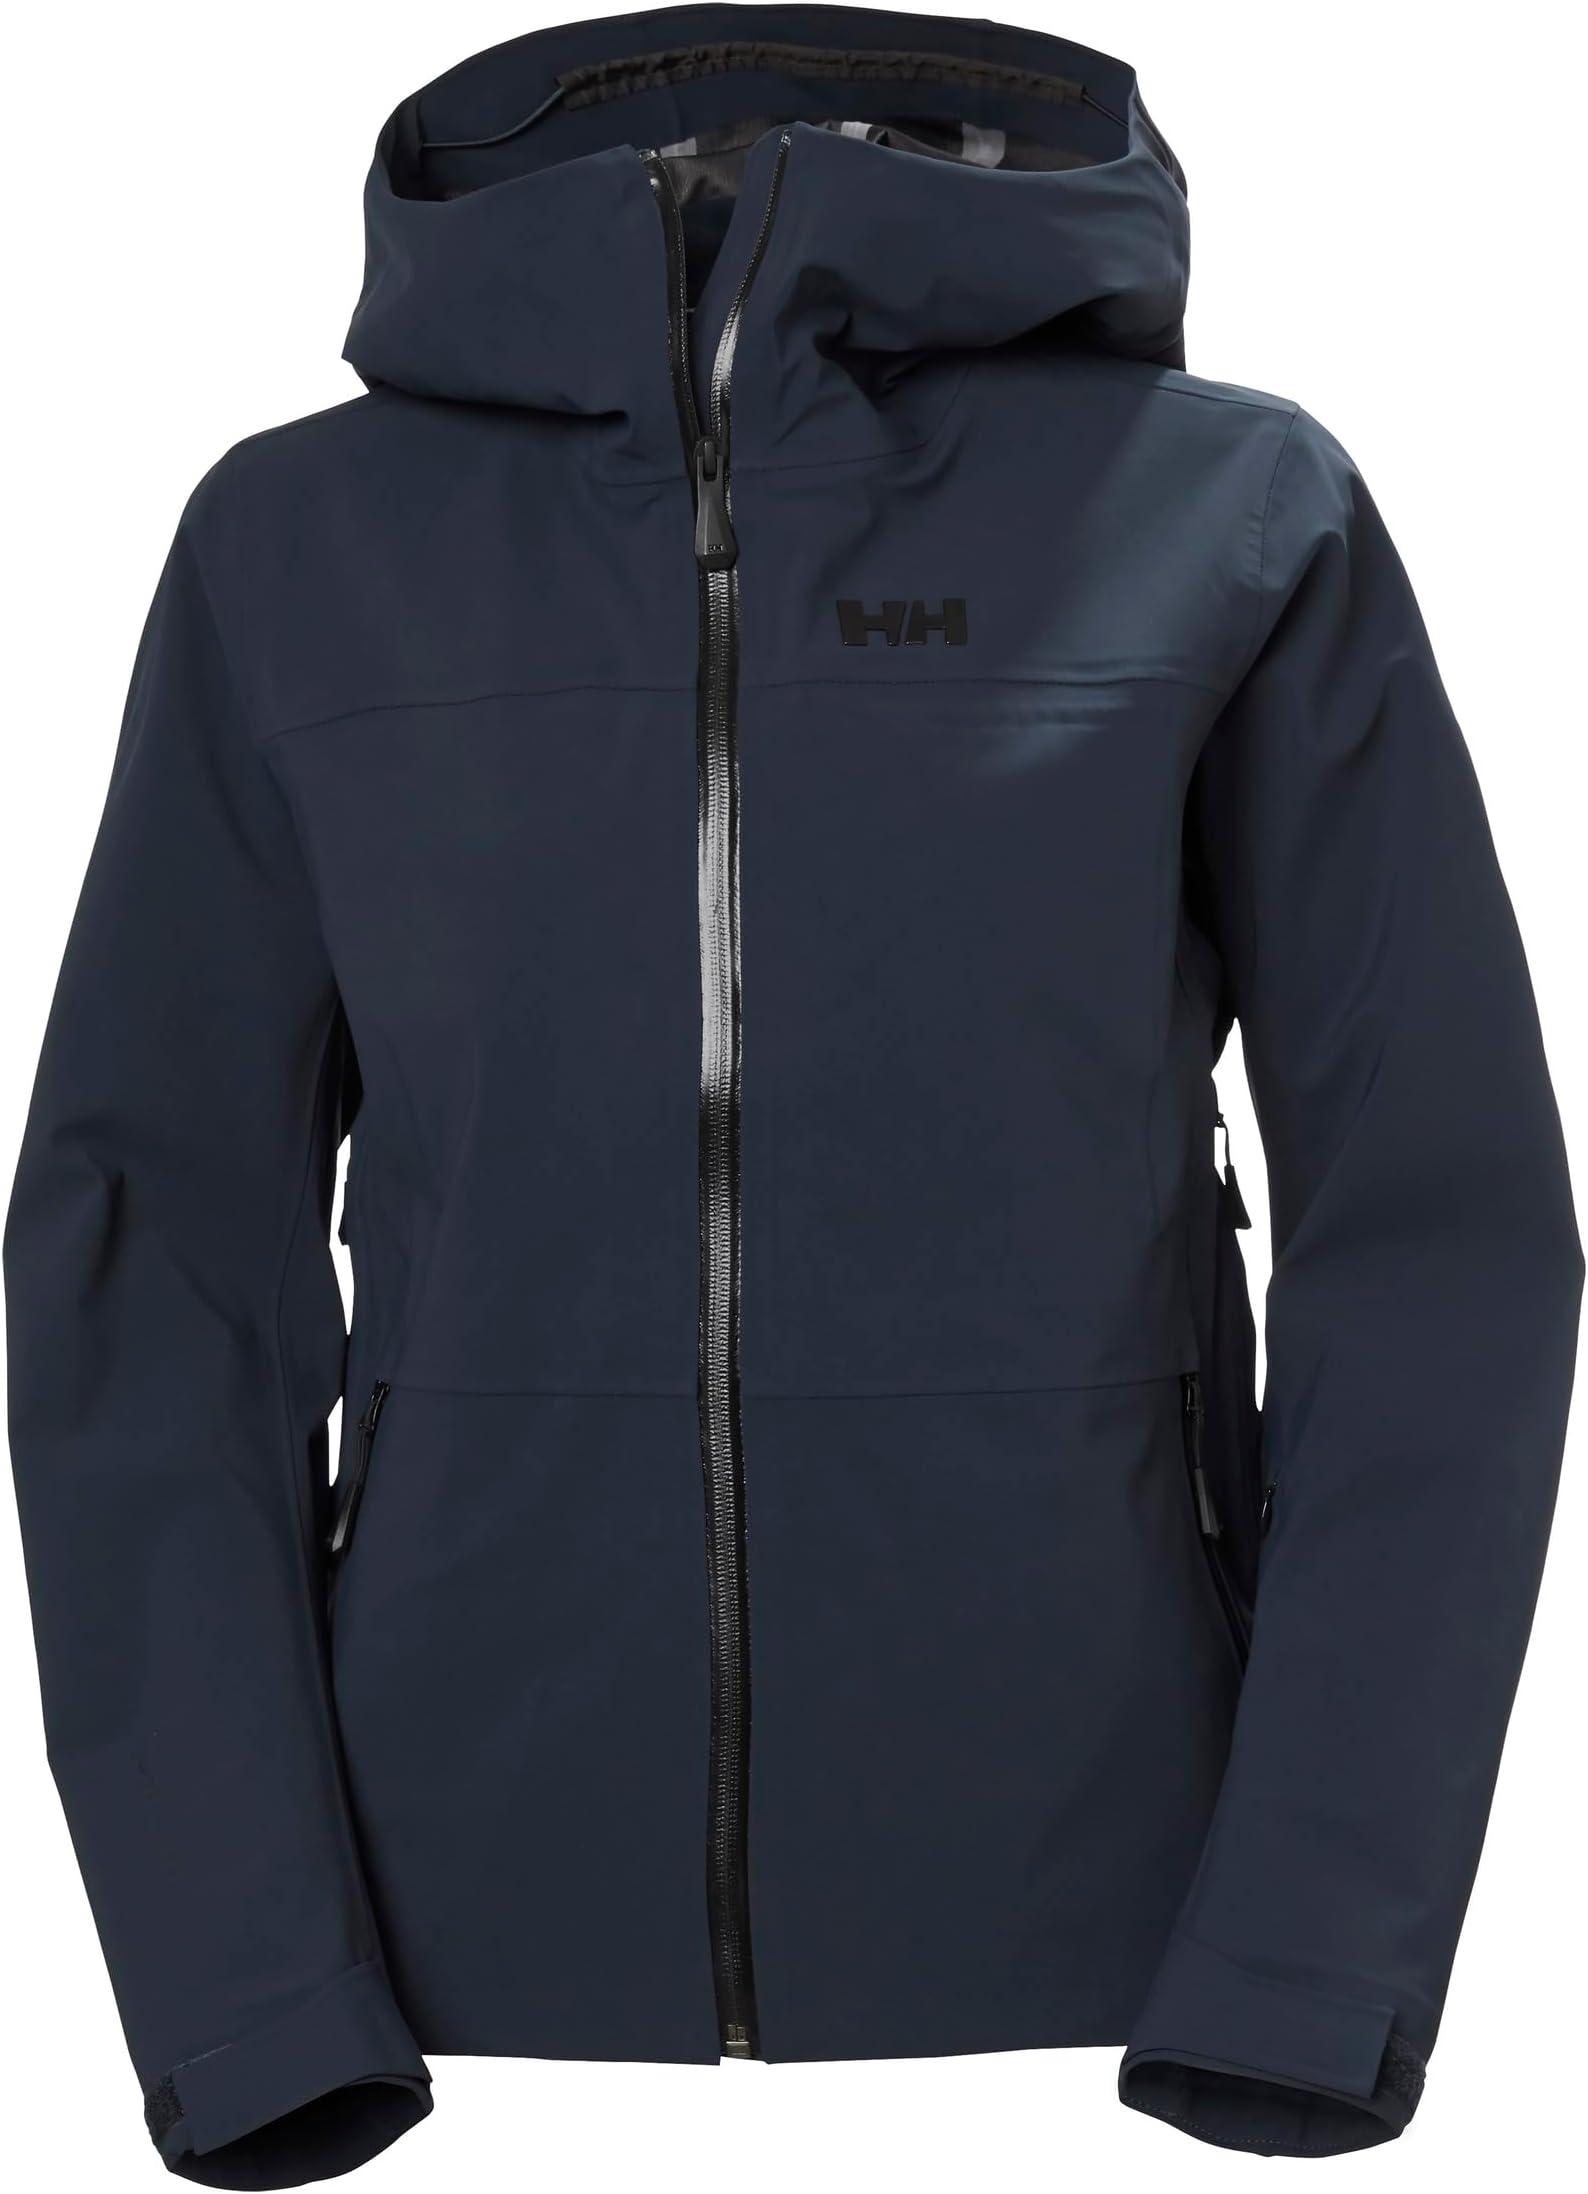 куртка motionista 3l shell jacket helly hansen цвет terrazzo Куртка Motionista 3L Shell Jacket Helly Hansen, темно-синий